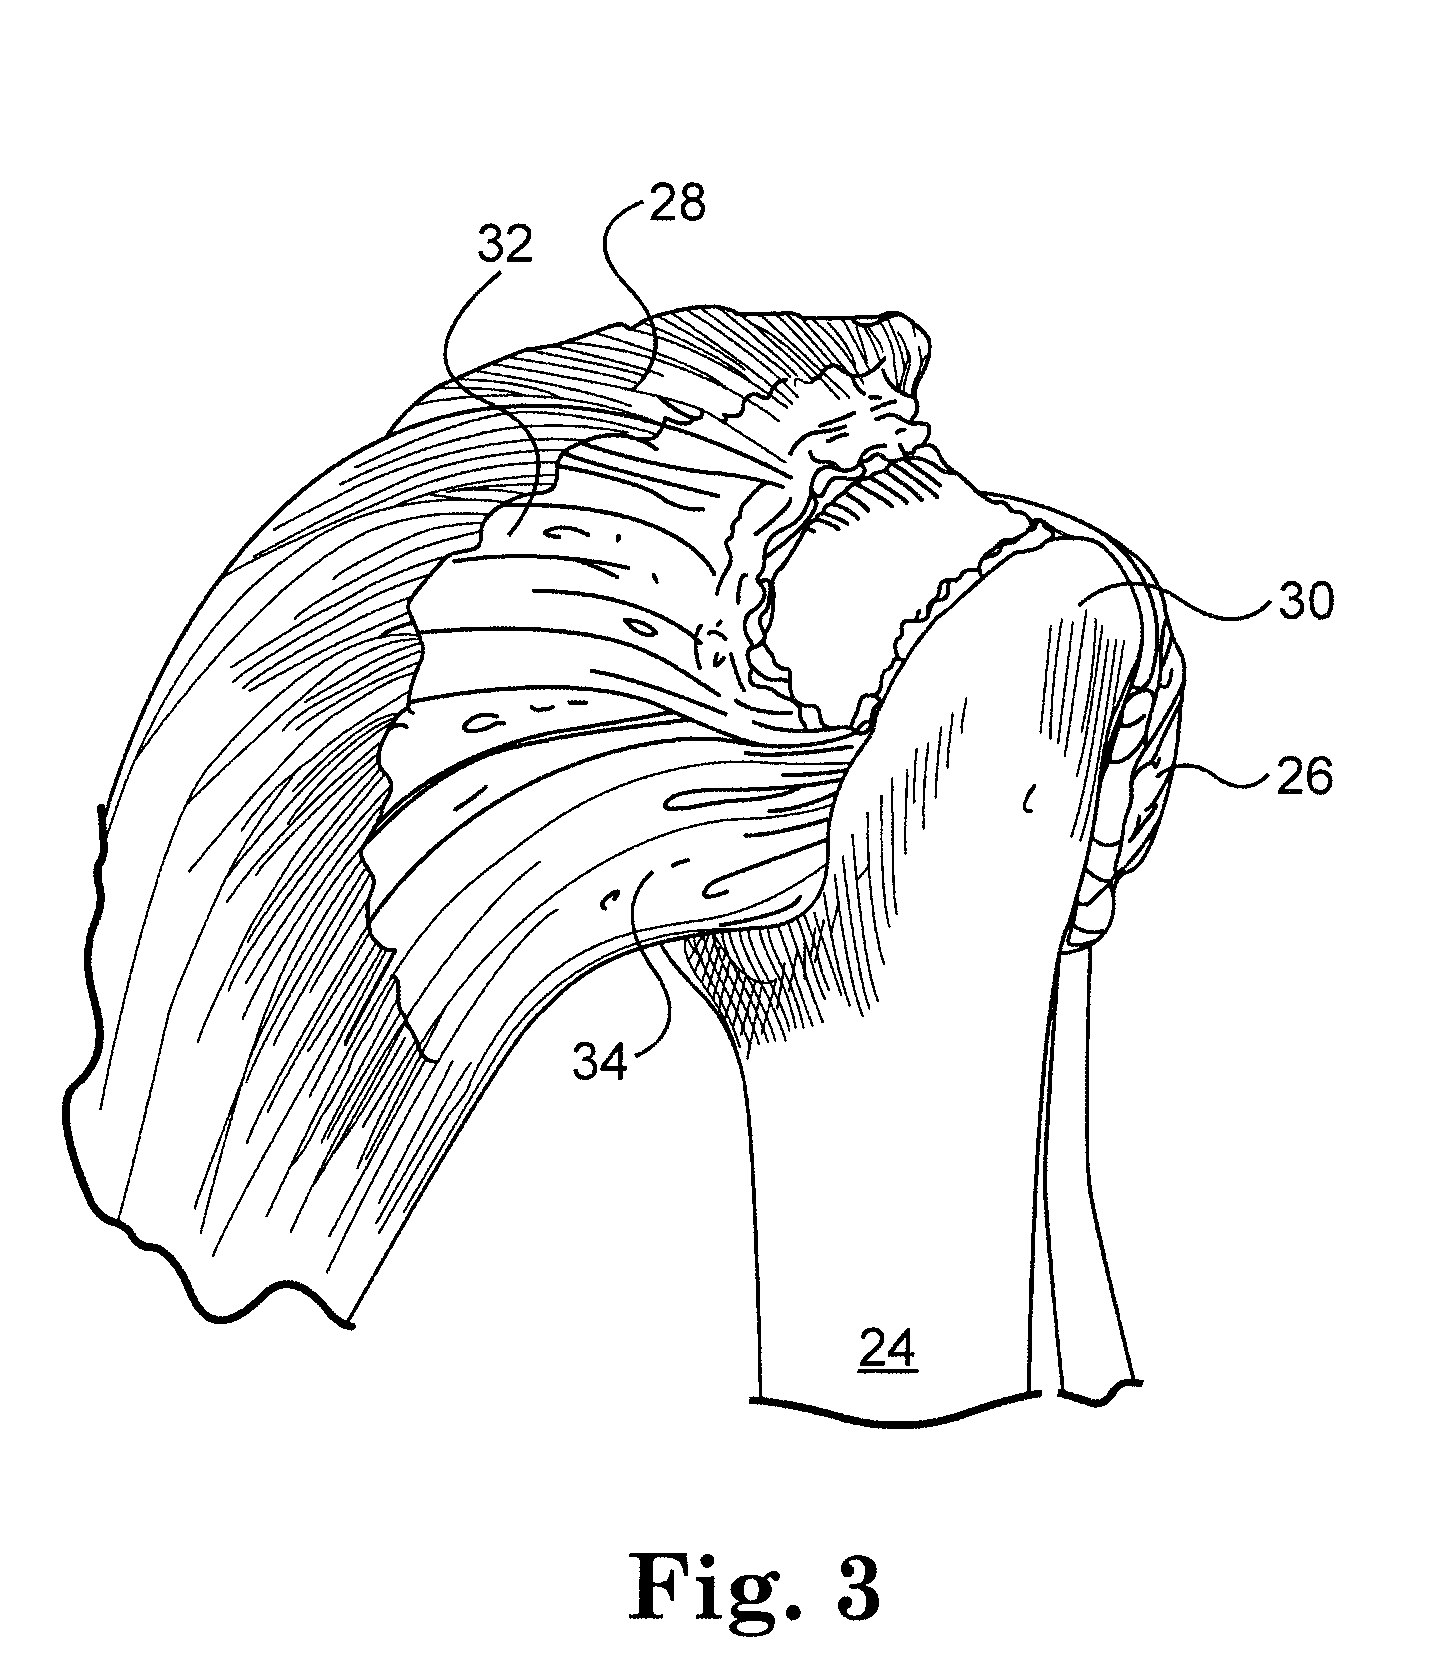 System and method for repairing tendons and ligaments